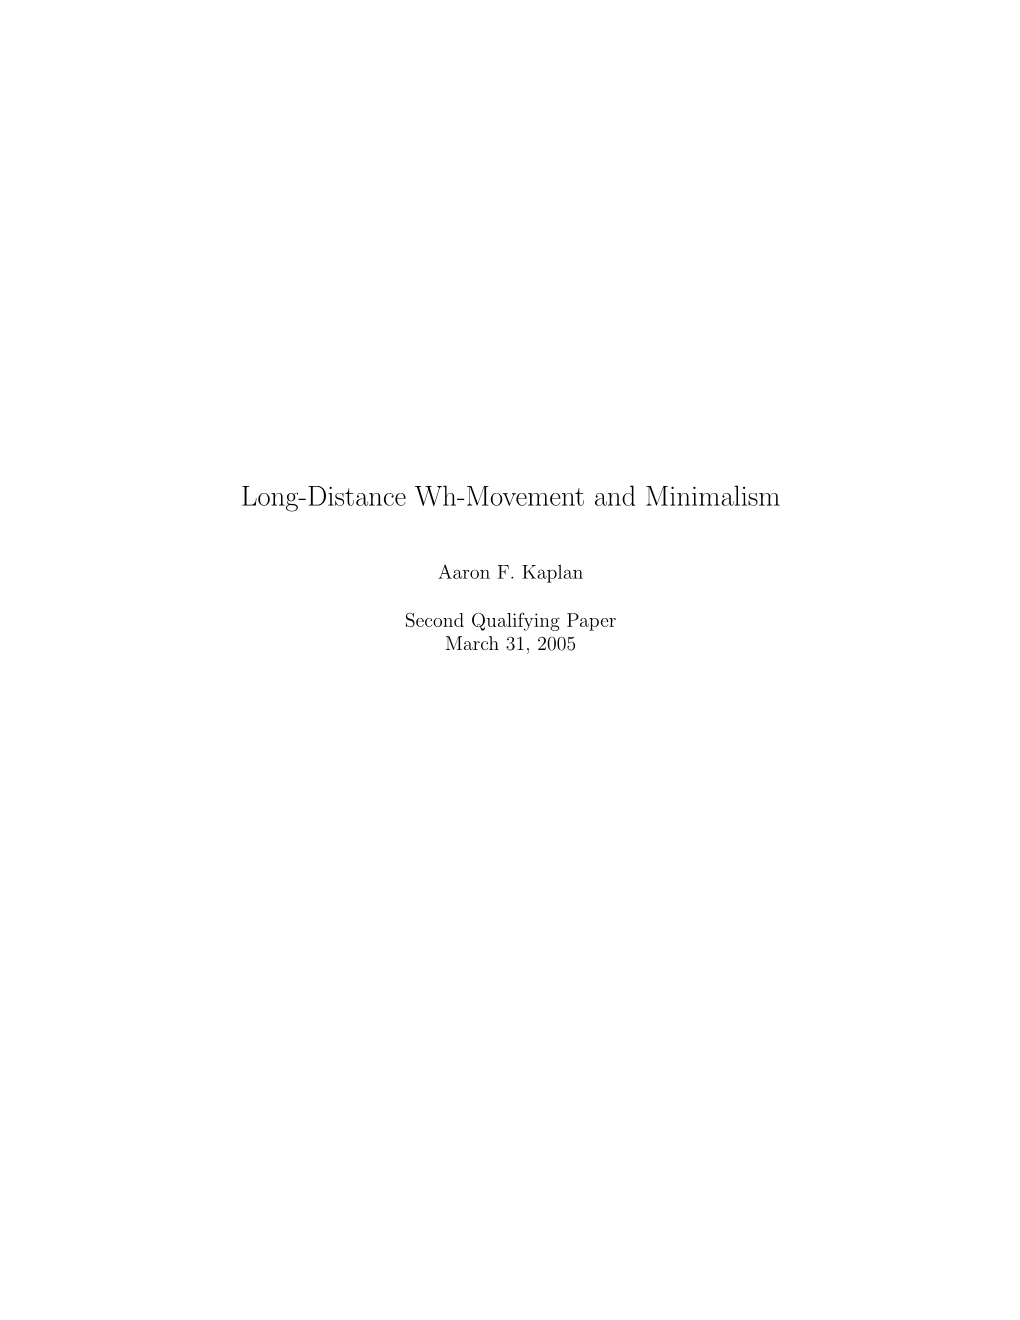 Long-Distance Wh-Movement and Minimalism